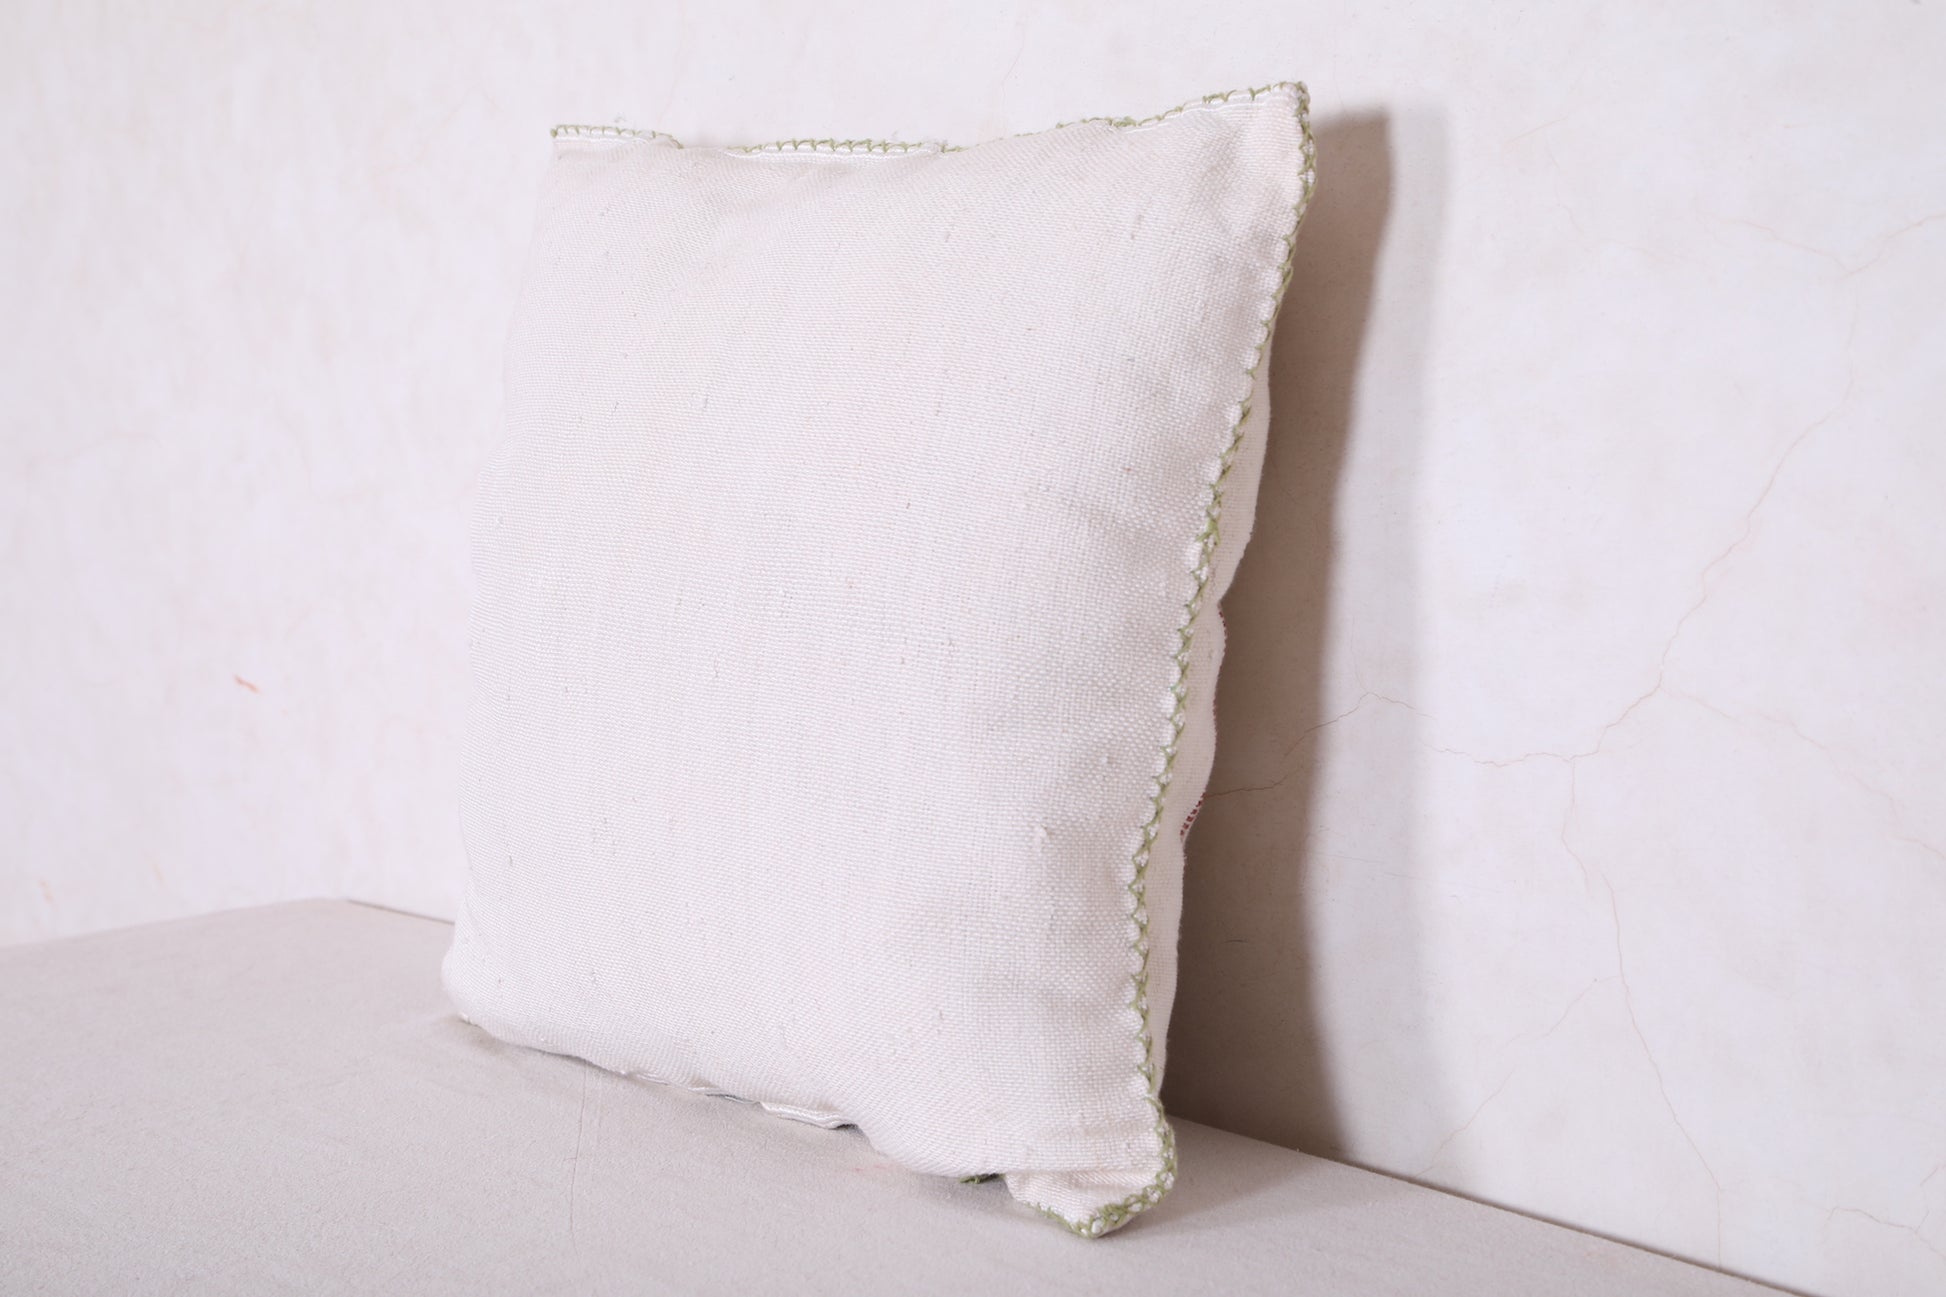 Moroccan pillow sqaure 18.1 INCHES X 18.1 INCHES